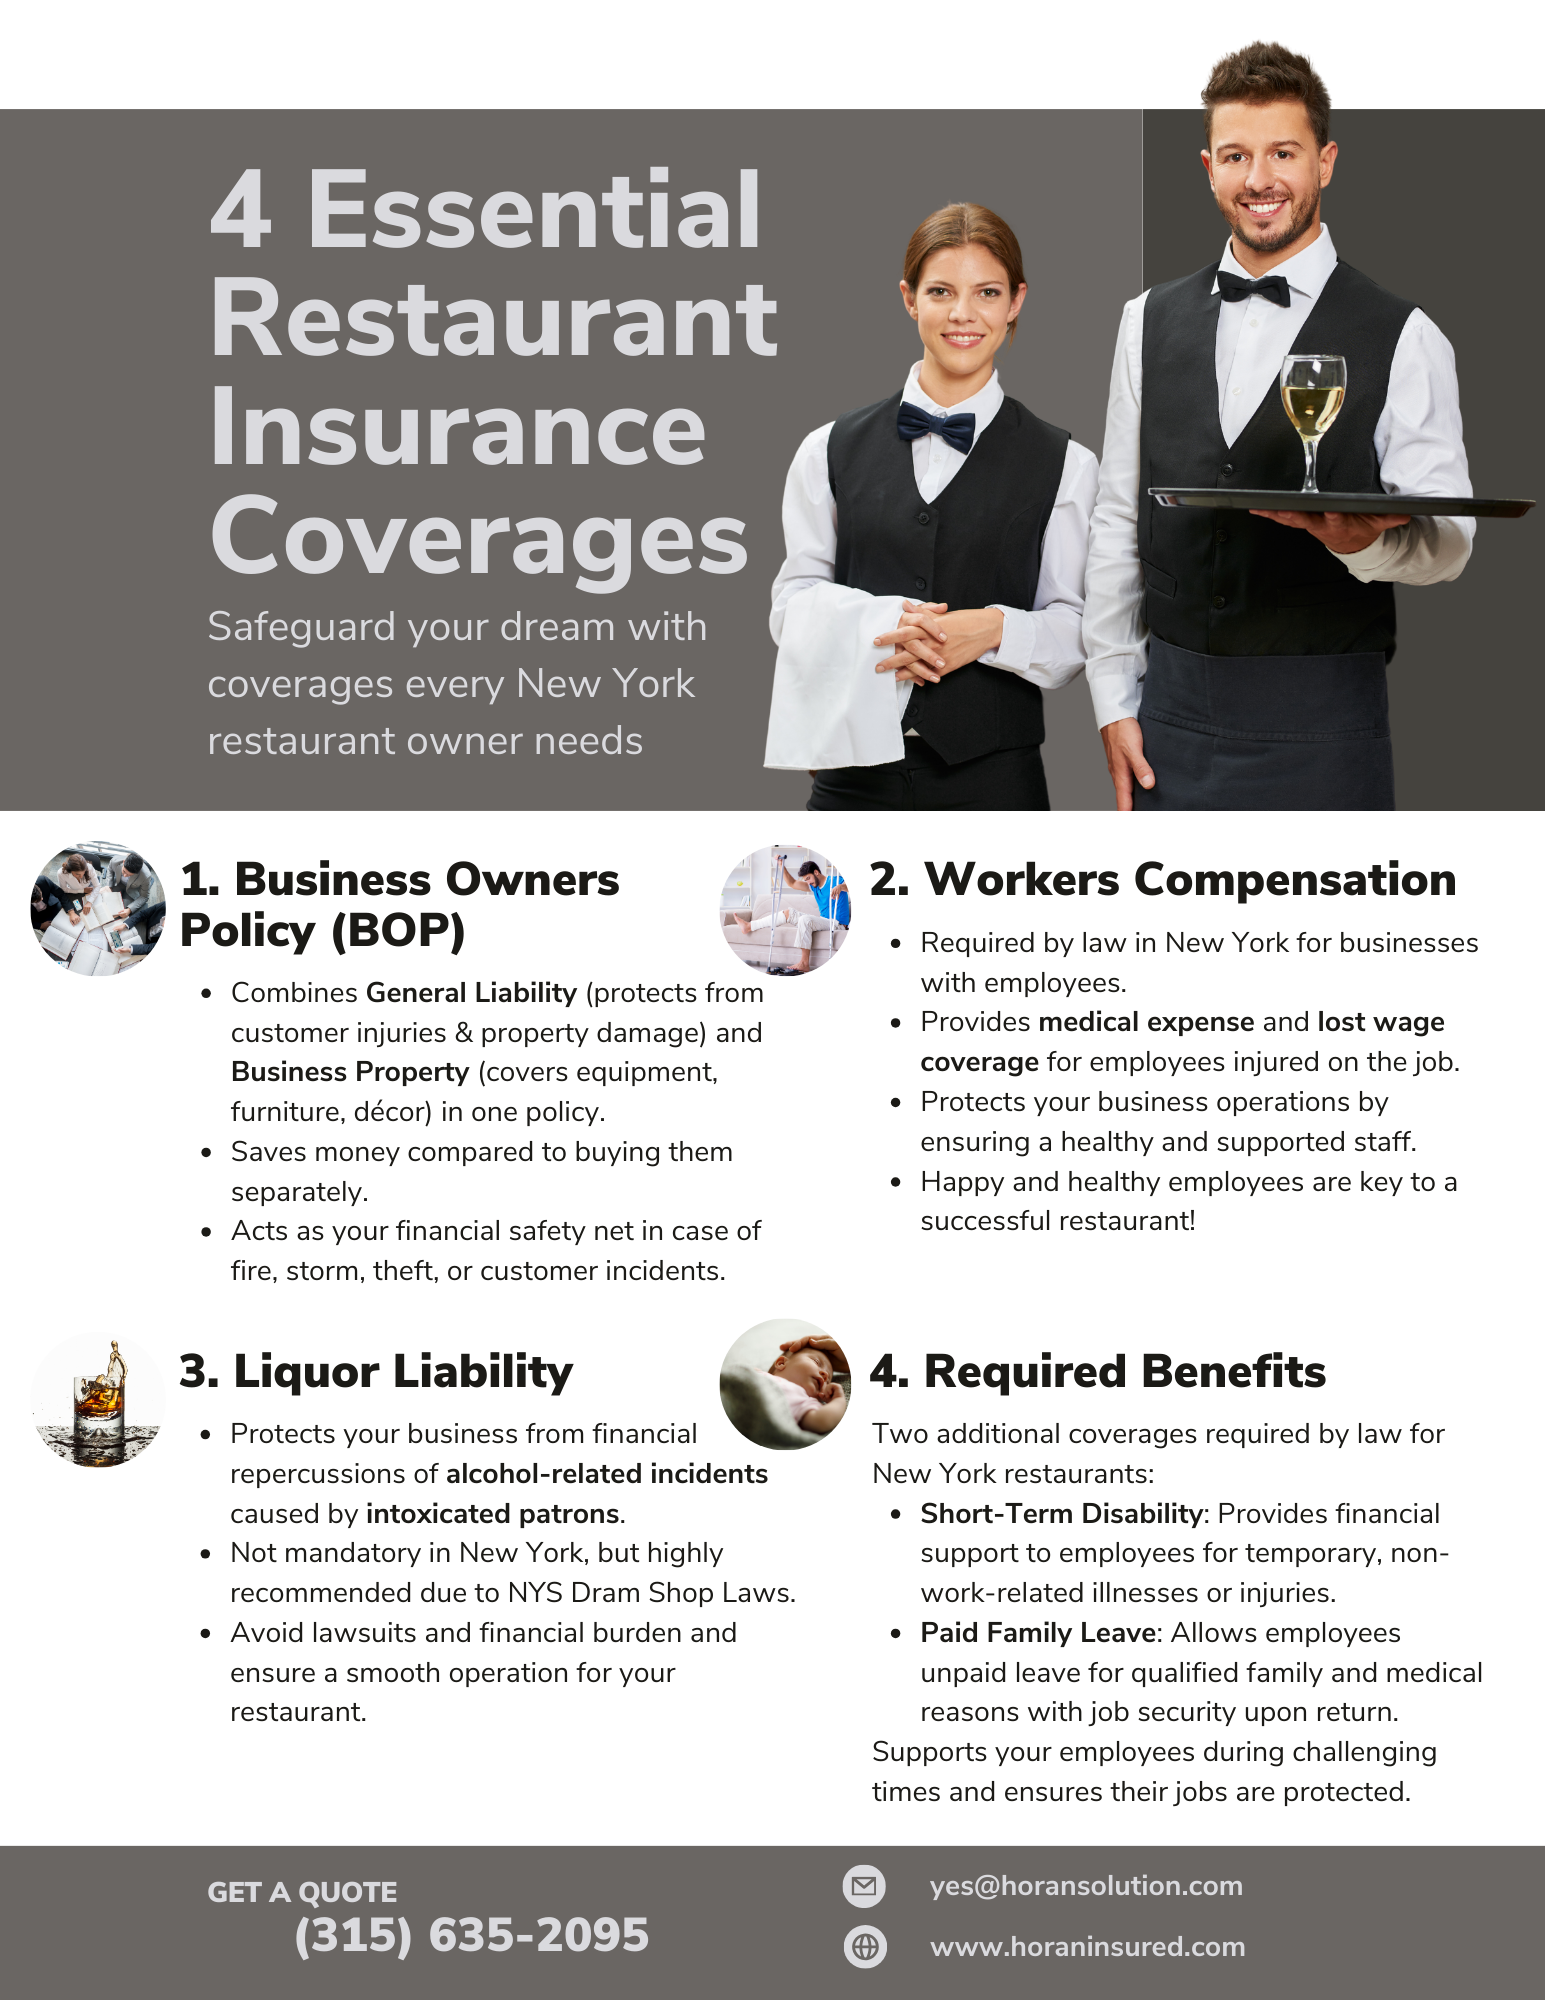 4 essential restaurant insurance coverages every New York restaurant owner needs.